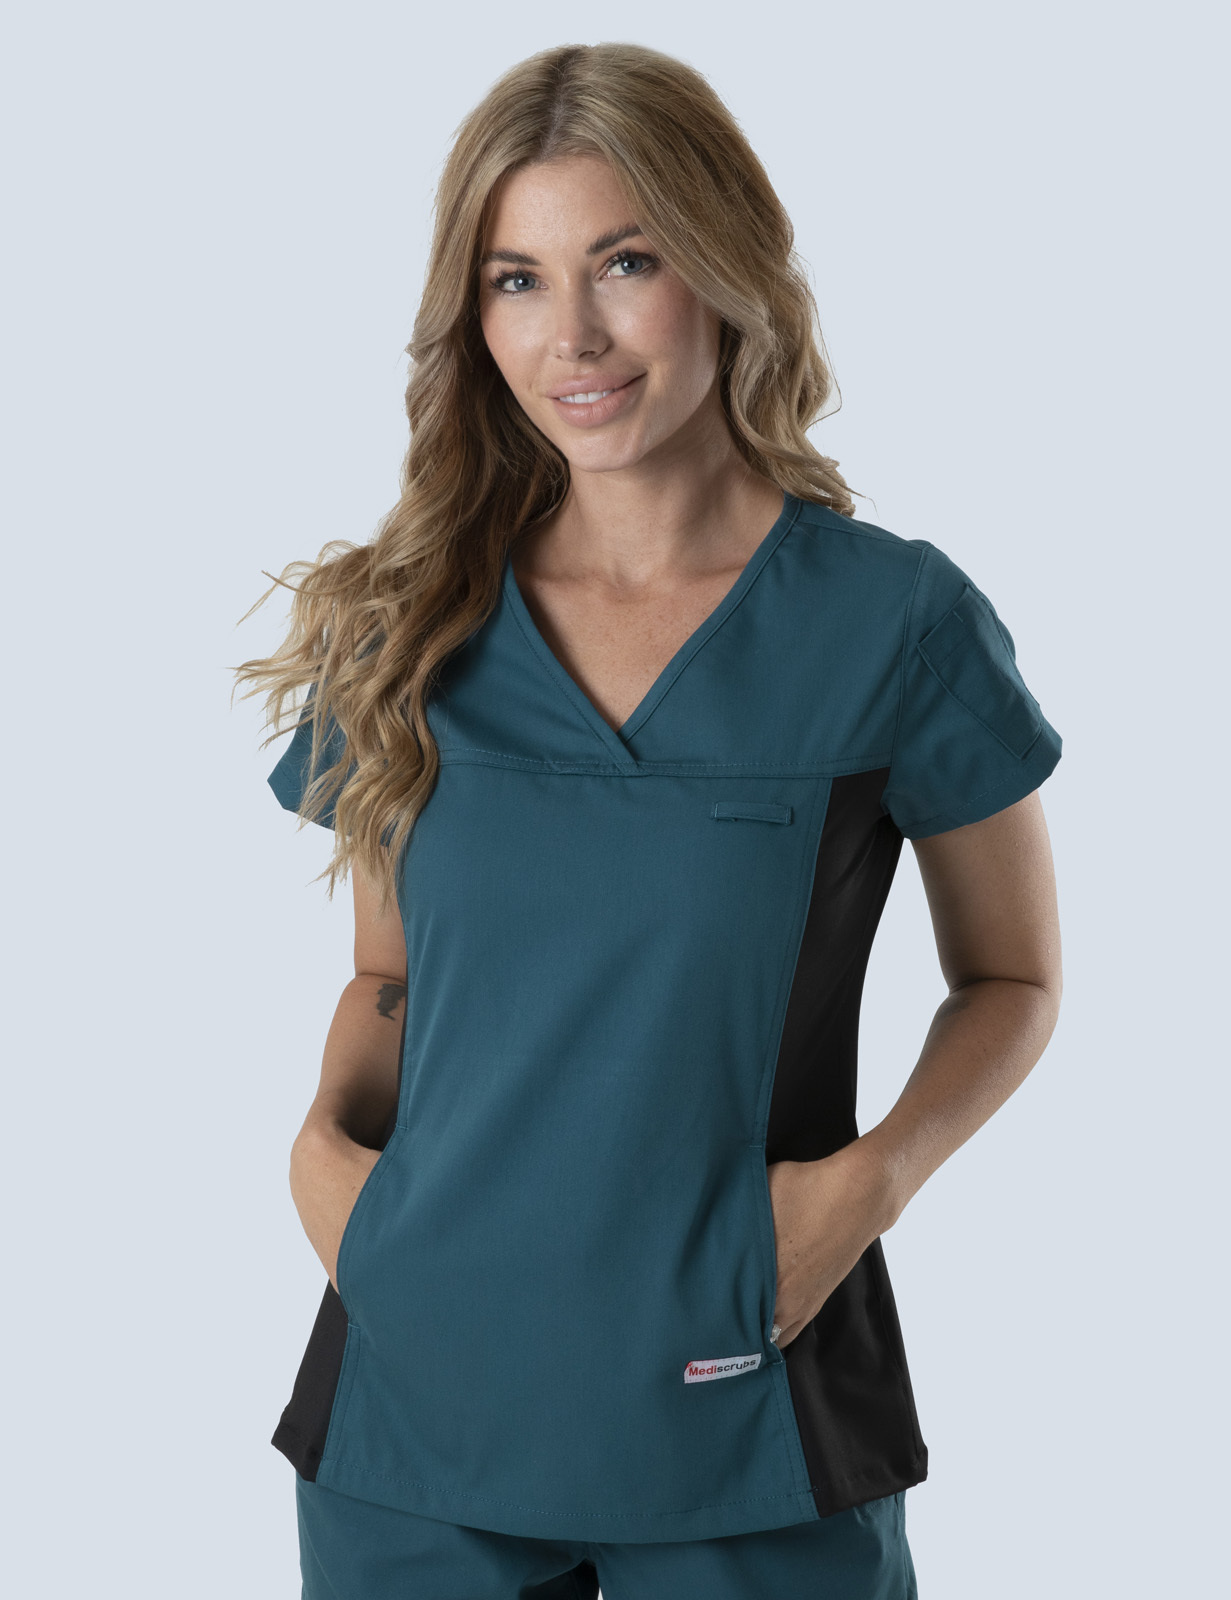 Women's Fit Solid Scrub Top With Spandex Panel - Caribbean - 3X Large